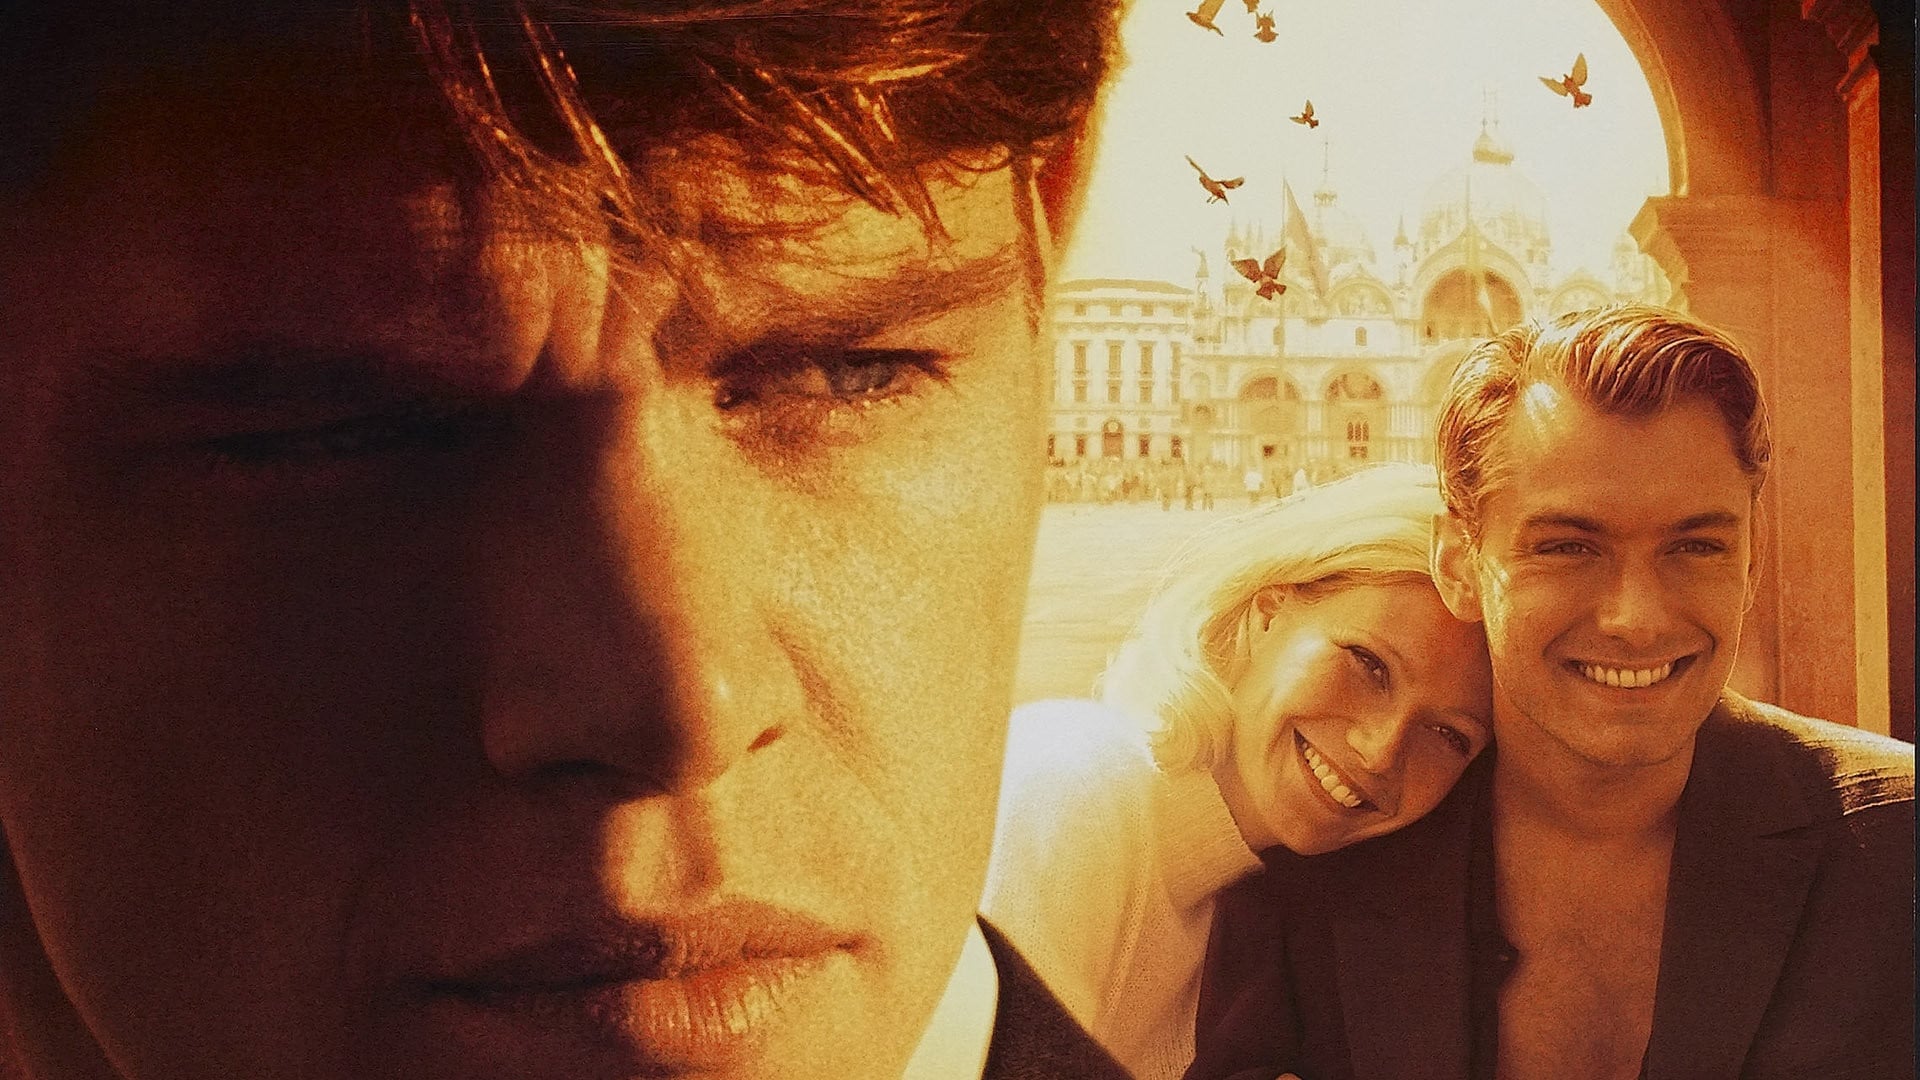 The Talented Mr. Ripley